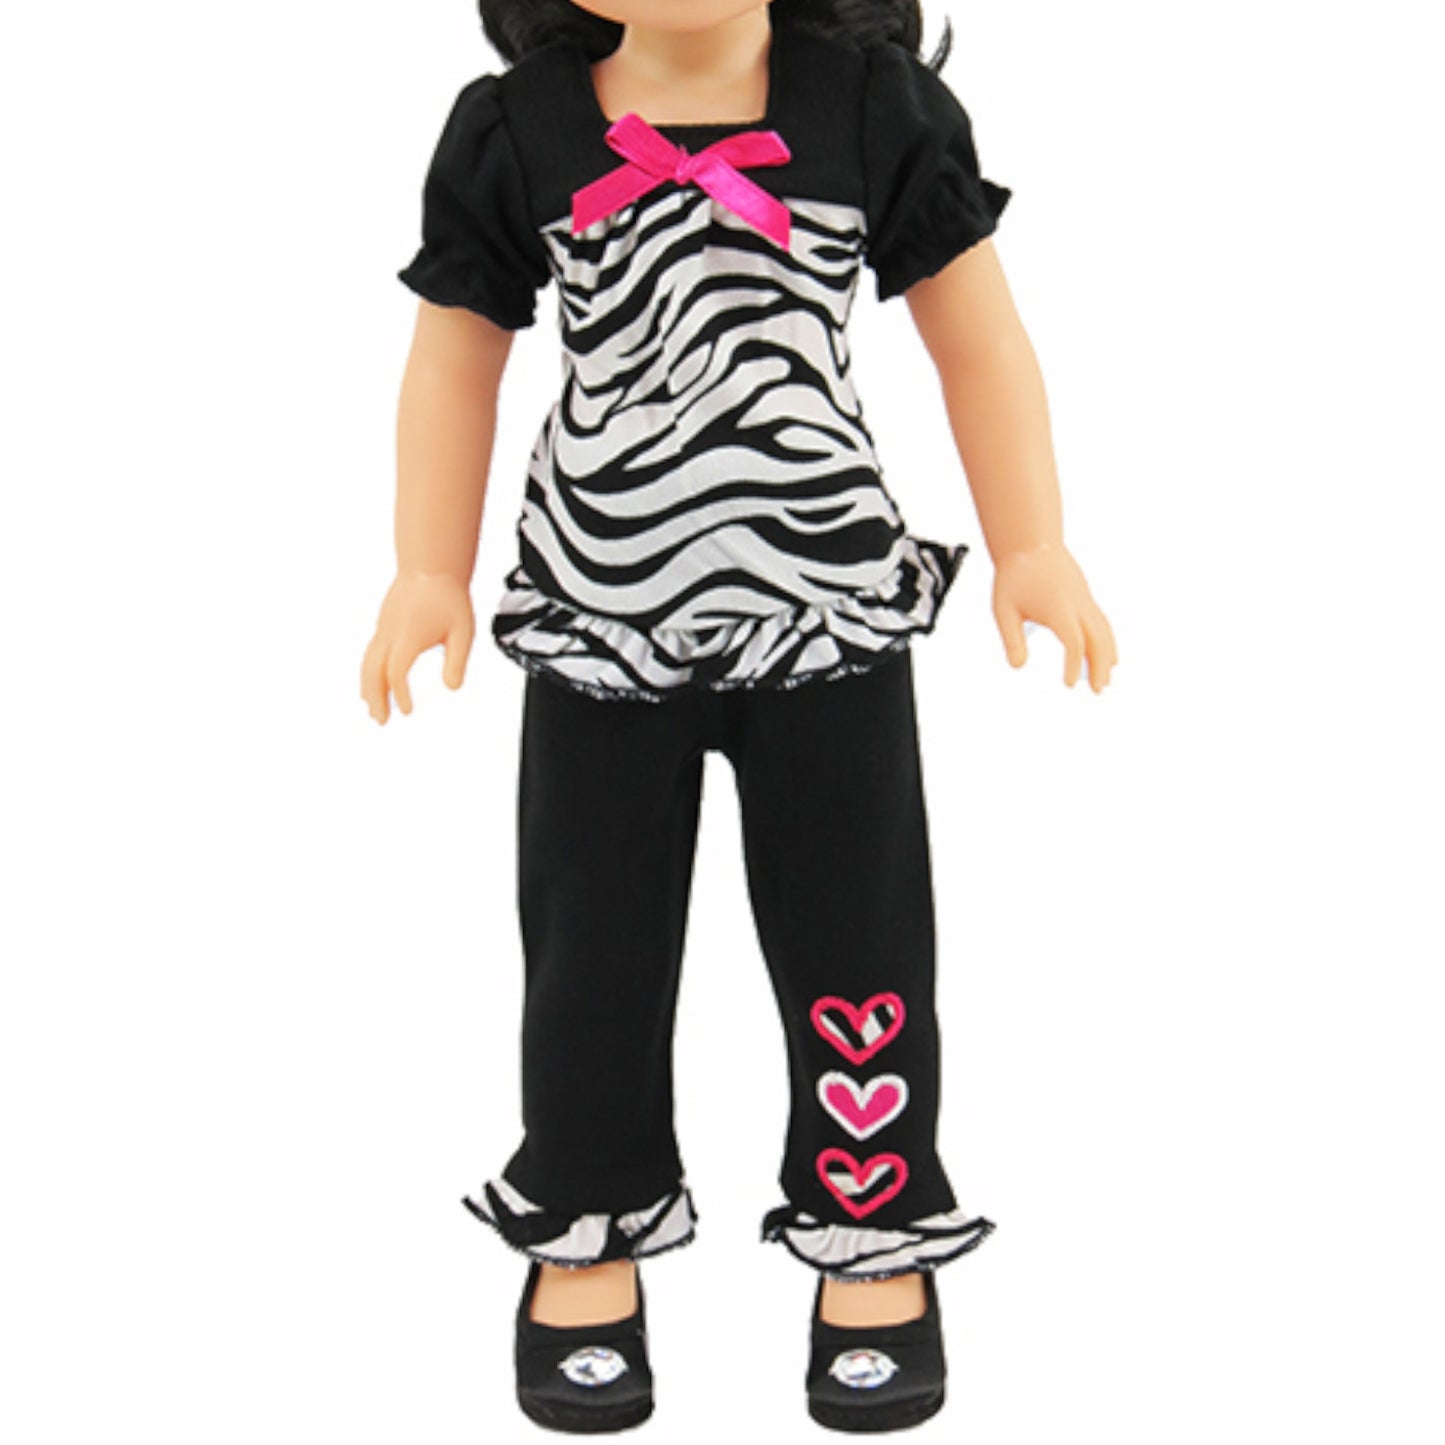 Zebra Triple Hearts Pant Set for 14 1/2-inch dolls with doll